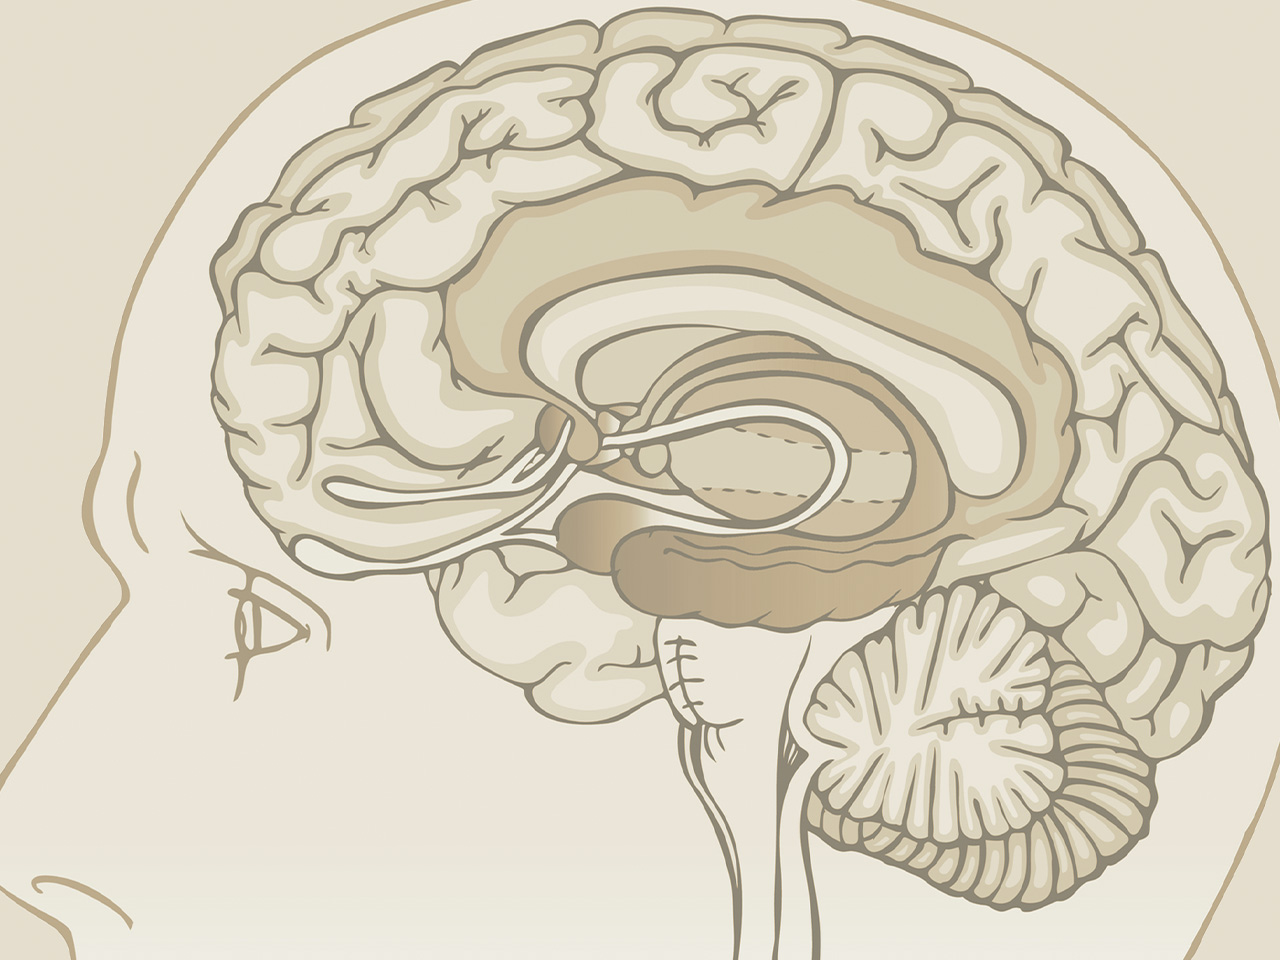 Functions of The Hippocampus Unveiled